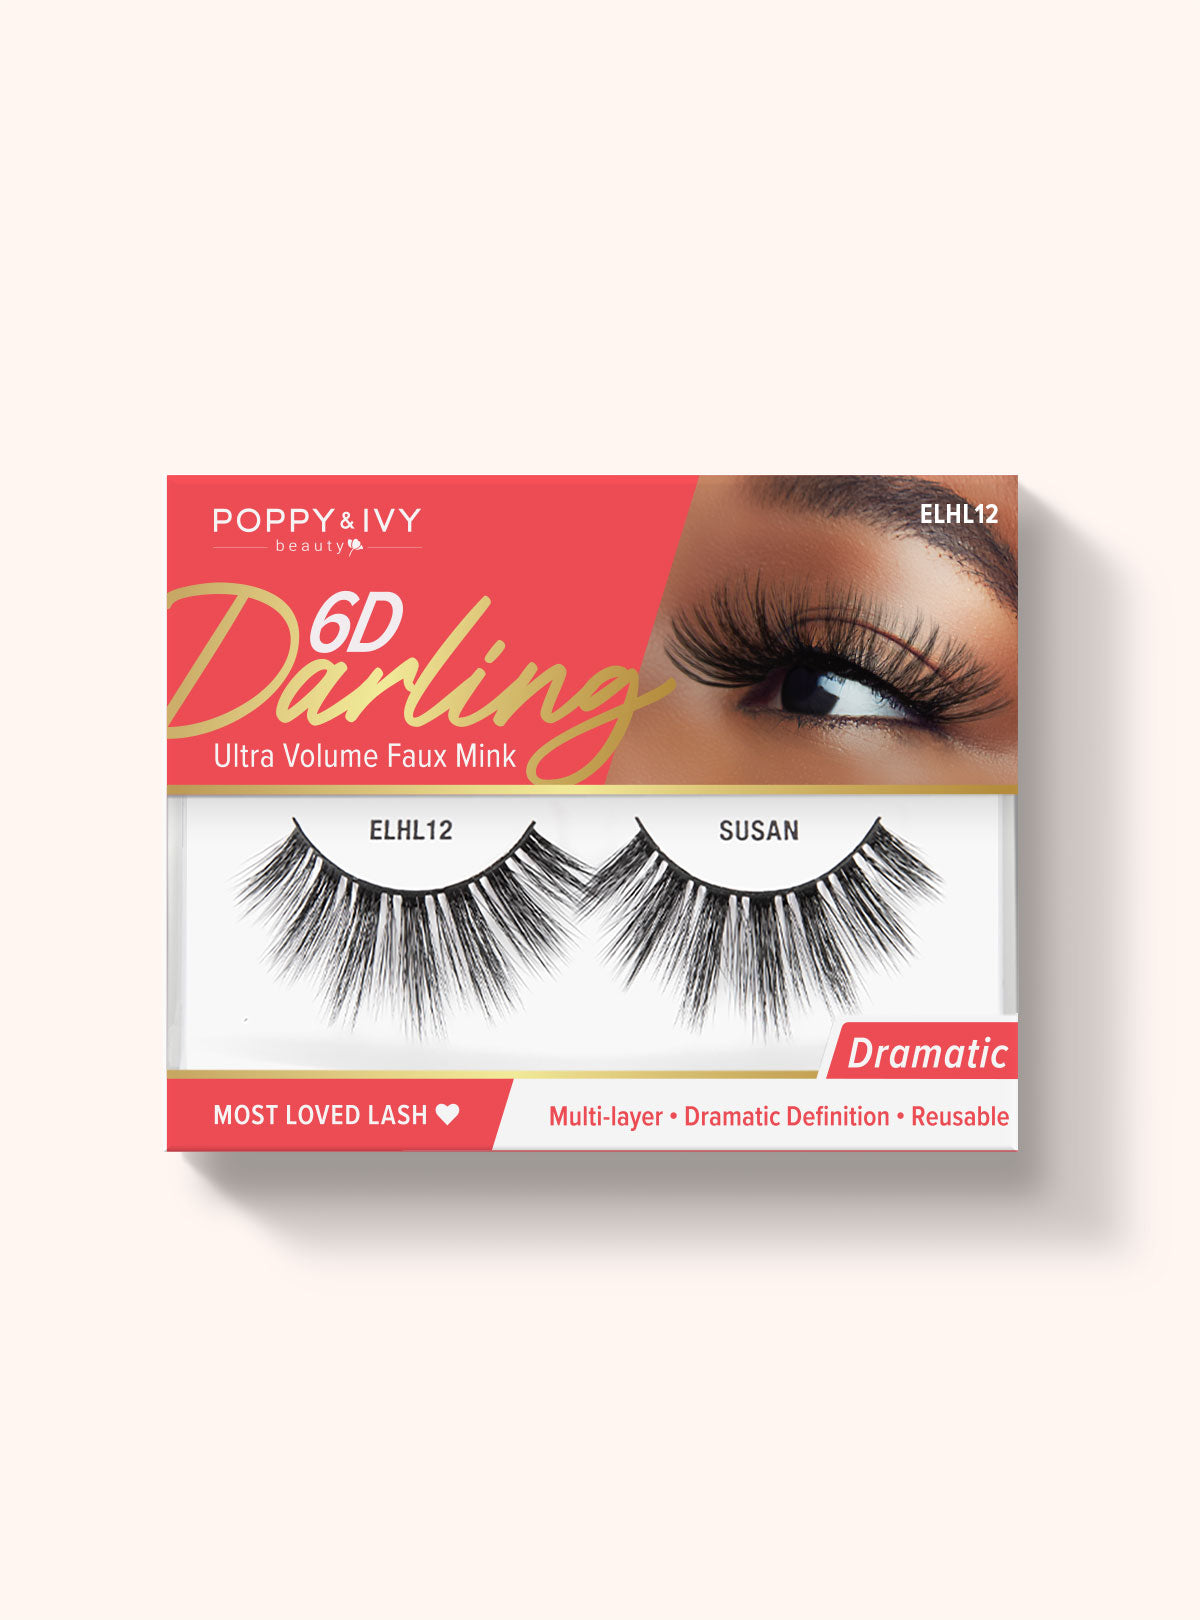 Poppy & Ivy 6D Darling Lashes || Susan